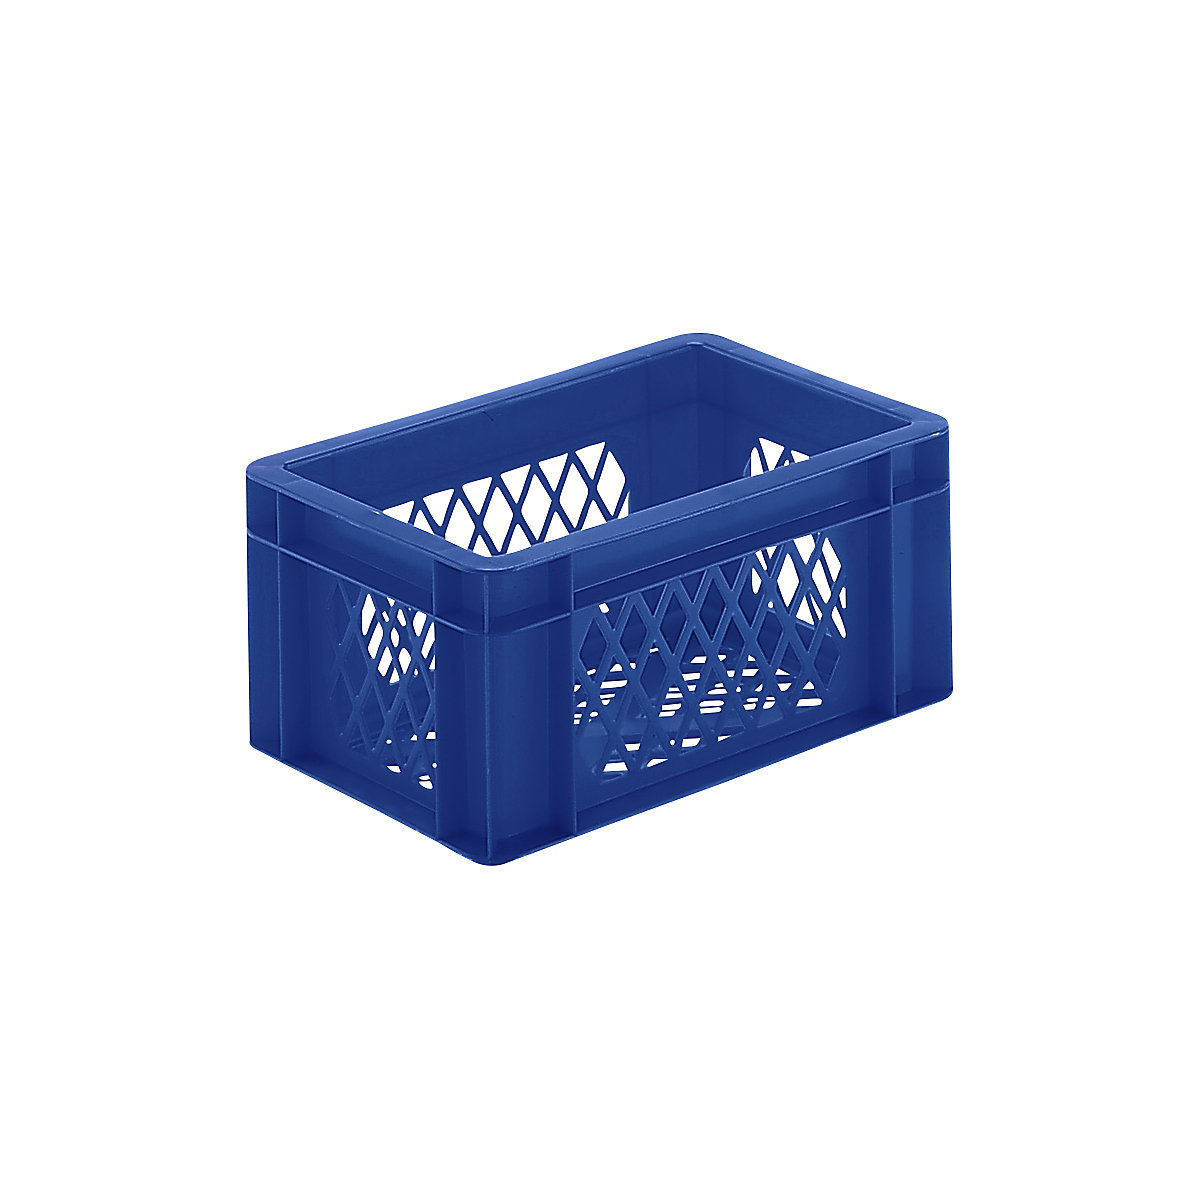 Euro stacking container, perforated walls and base, LxWxH 300 x 200 x 145 mm, blue, pack of 5-6